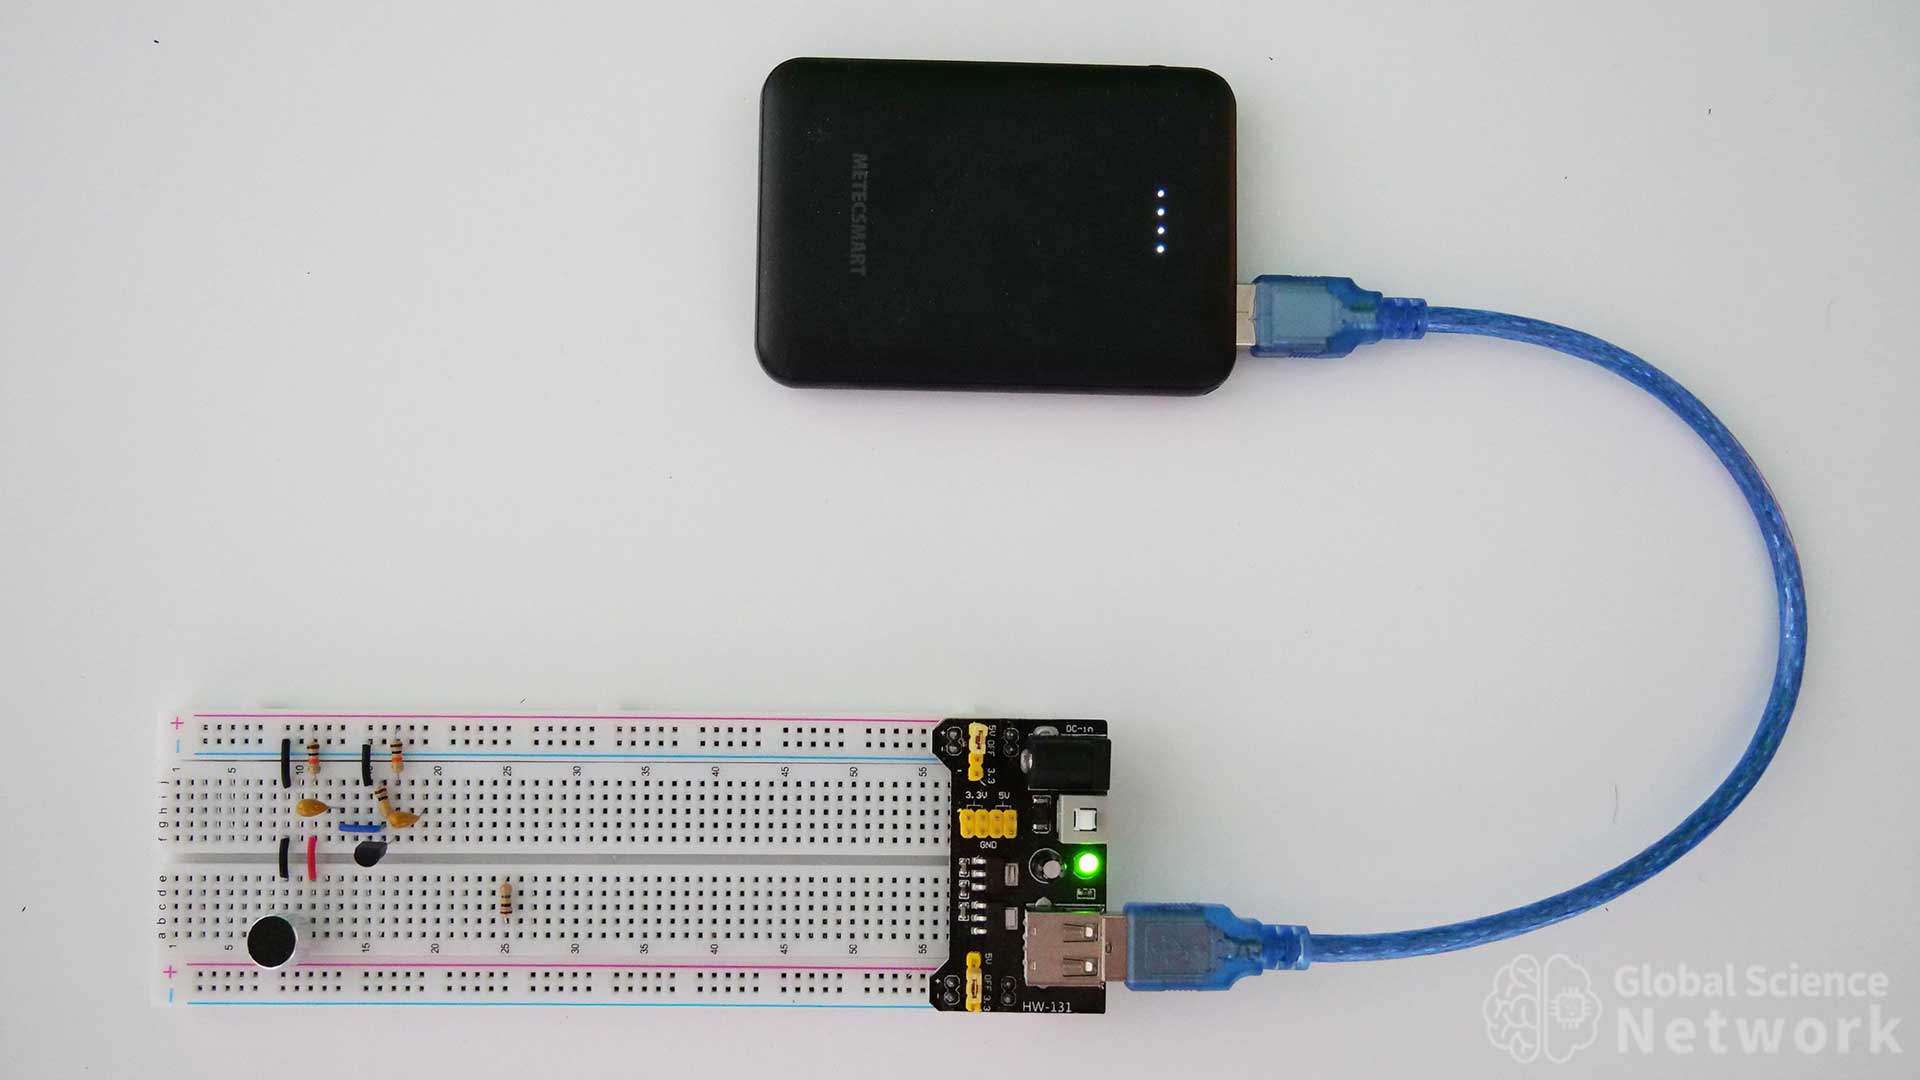 breadboard 3 volt and 5 volt power supply with USB battery pack